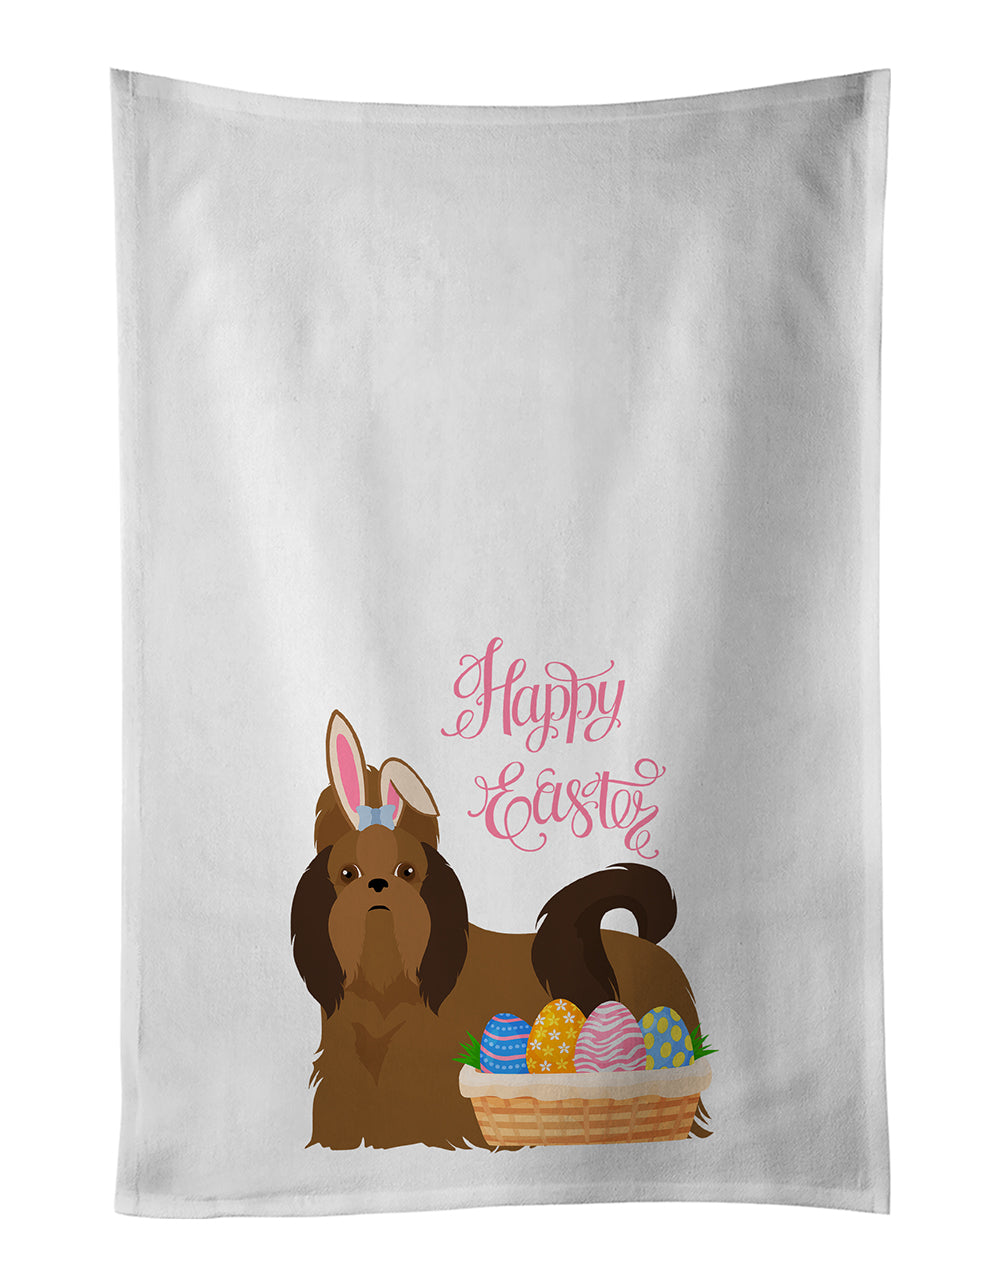 Buy this Red Shih Tzu Easter White Kitchen Towel Set of 2 Dish Towels